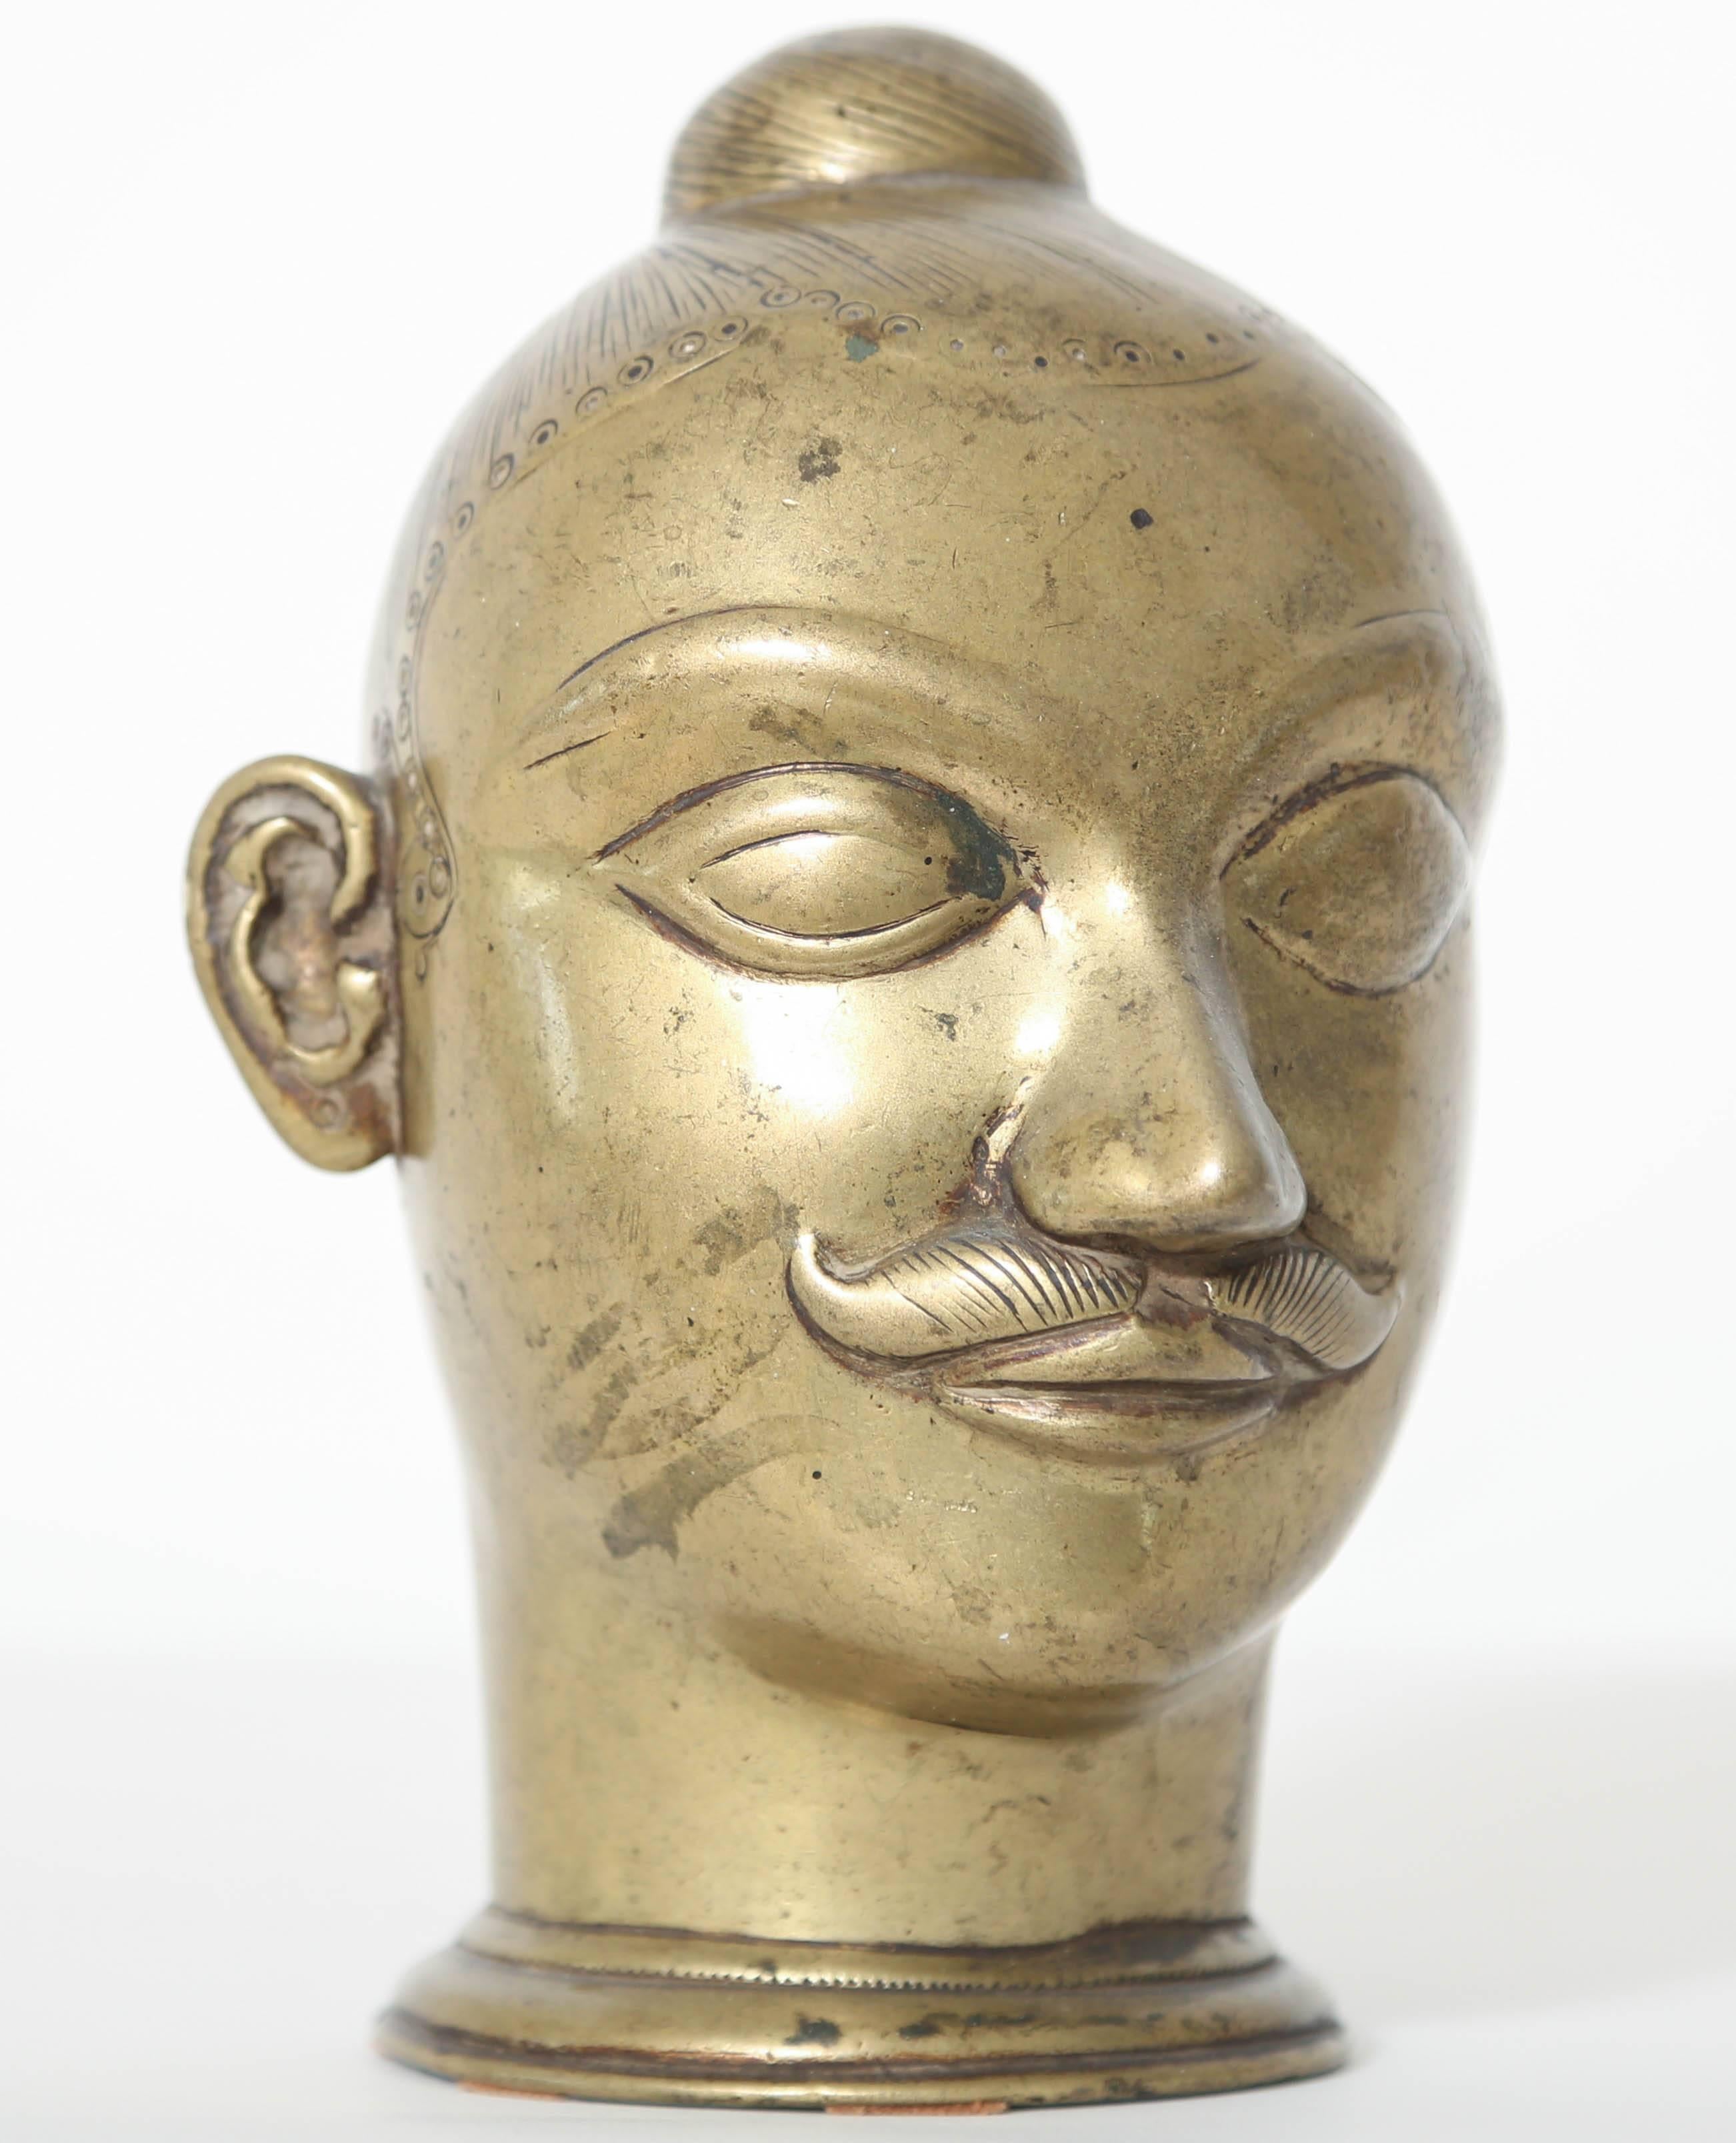 This brass mustachioed head with incised hair in a tight bun was intended to cover a sacred lingam, a symbol of the energy of God, worshipped throughout India. This fine example is from Western India, probably Maharashtra, 18th-19th century.